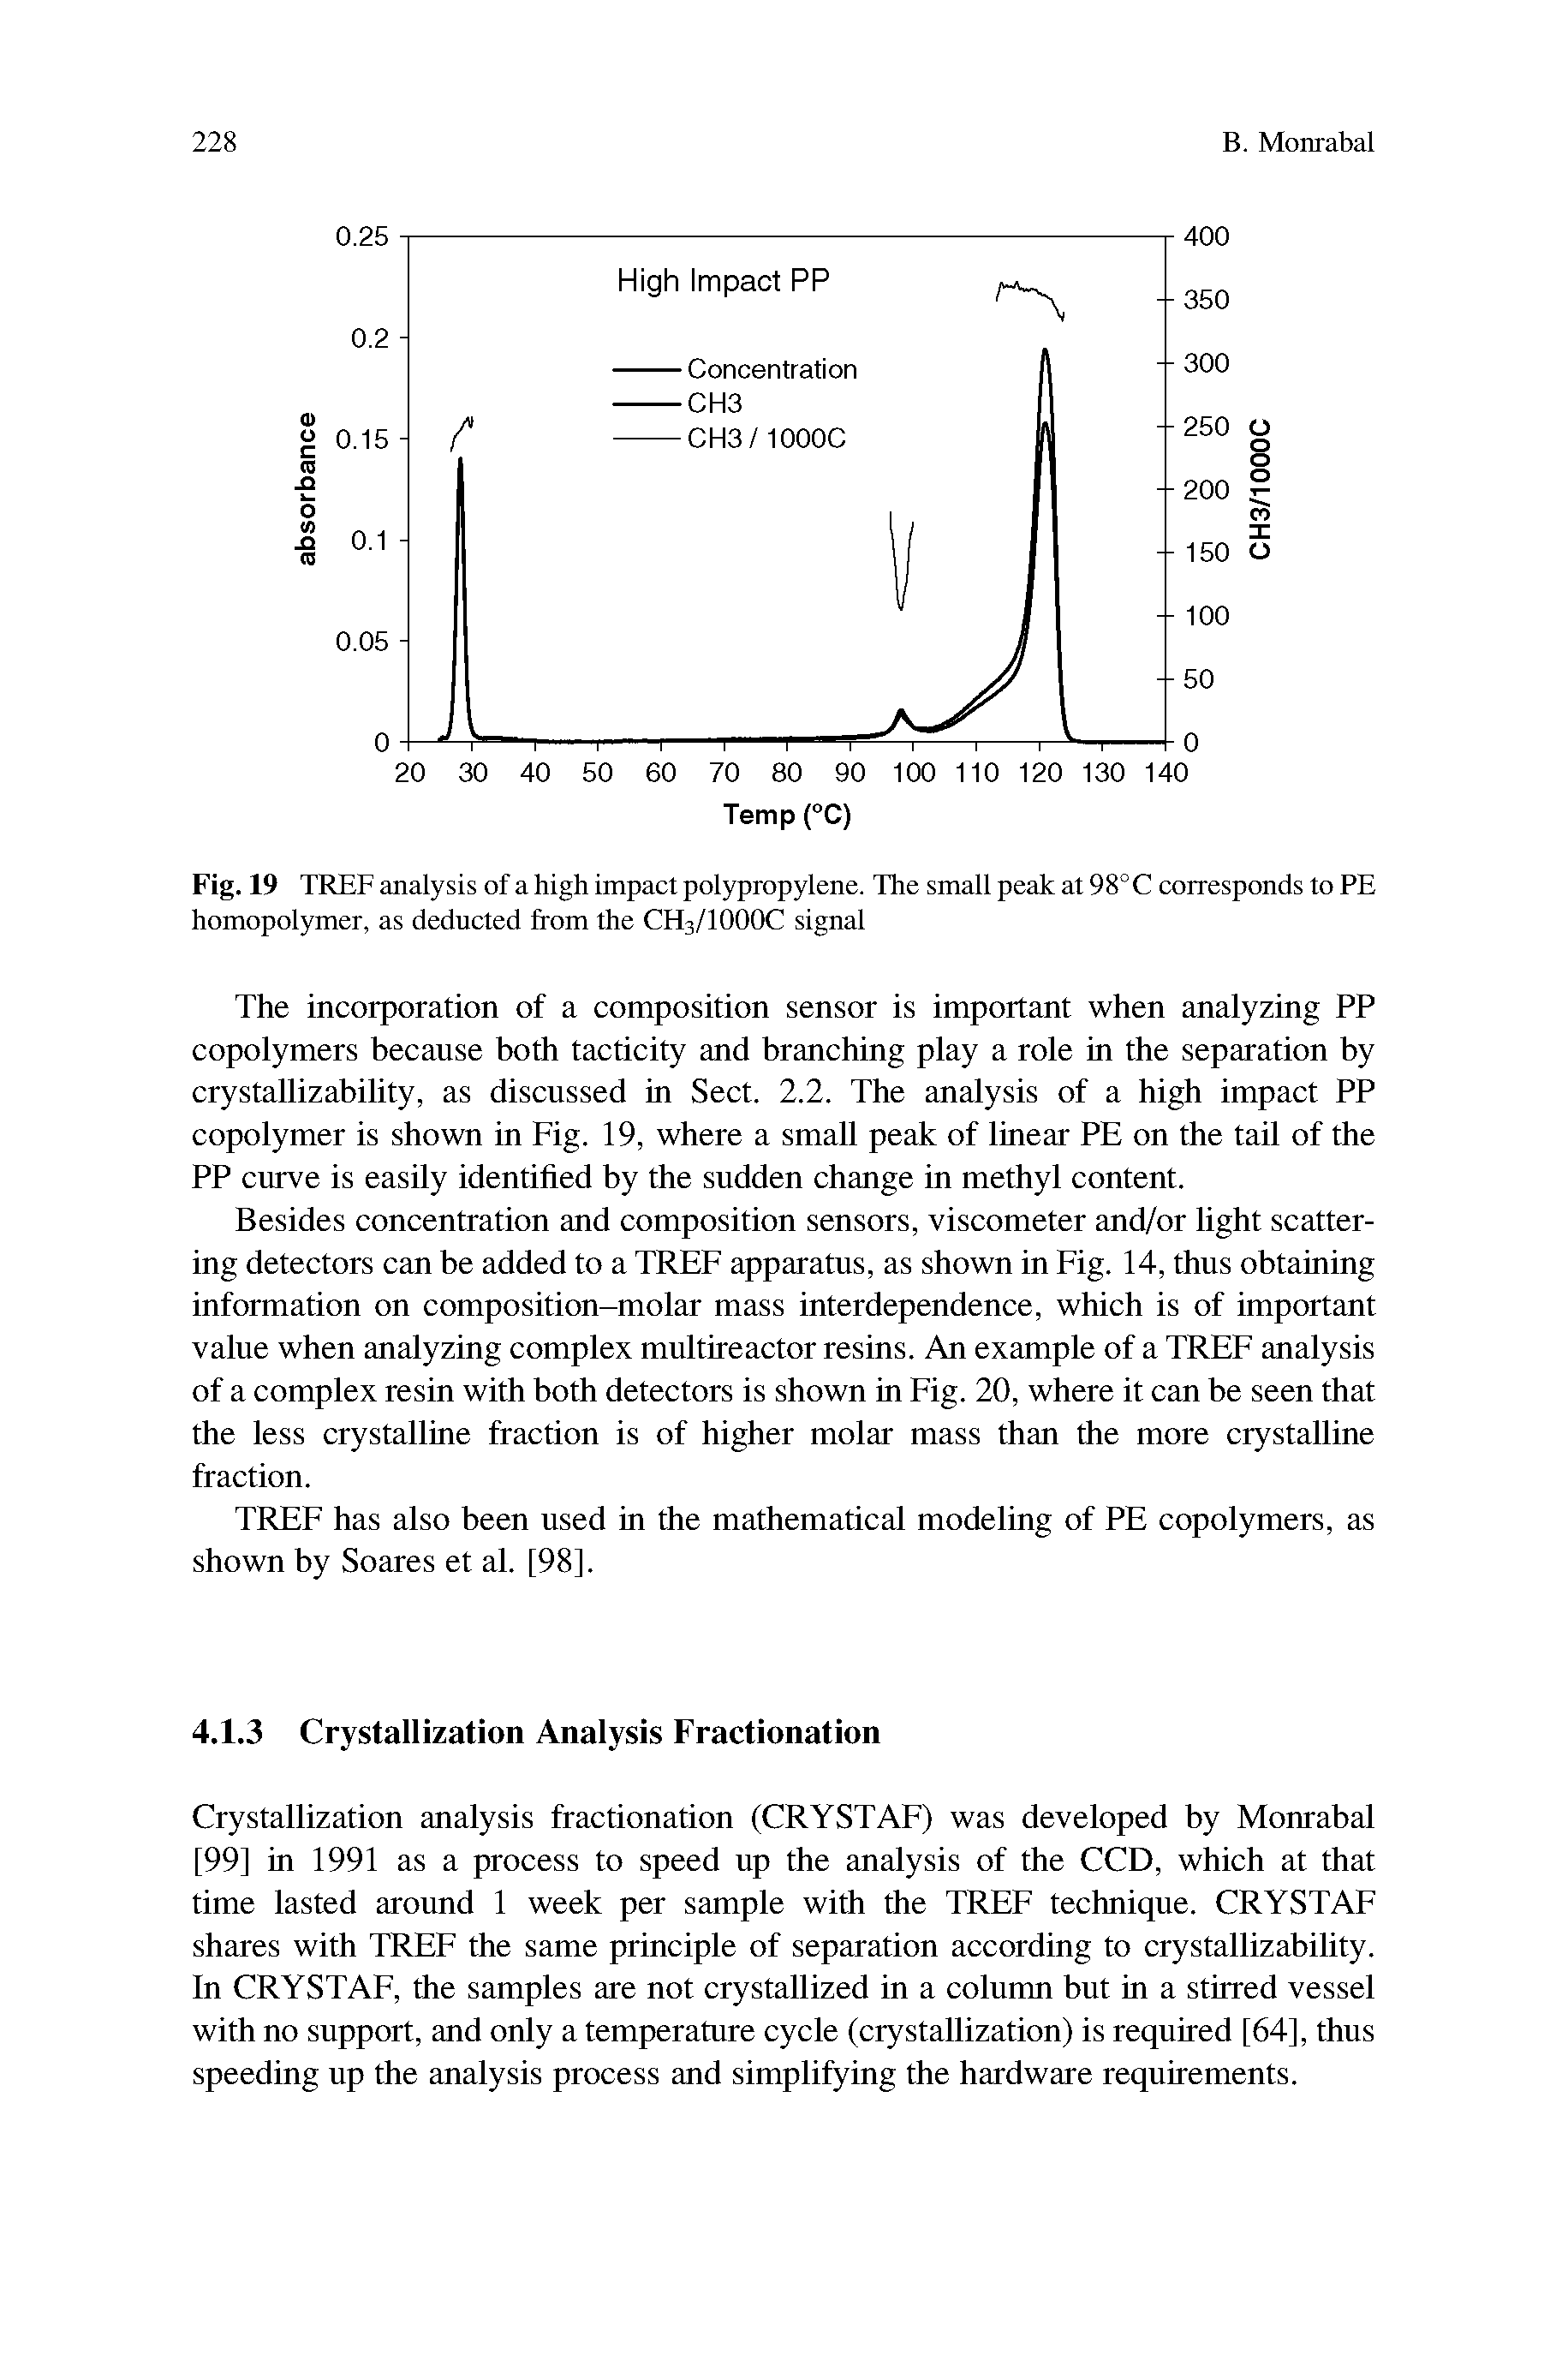 Fig. 19 TREF analysis of a high impact polypropylene. The small peak at 98°C corresponds to PE homopolymer, as deducted from the CH3/IOOOC signal...